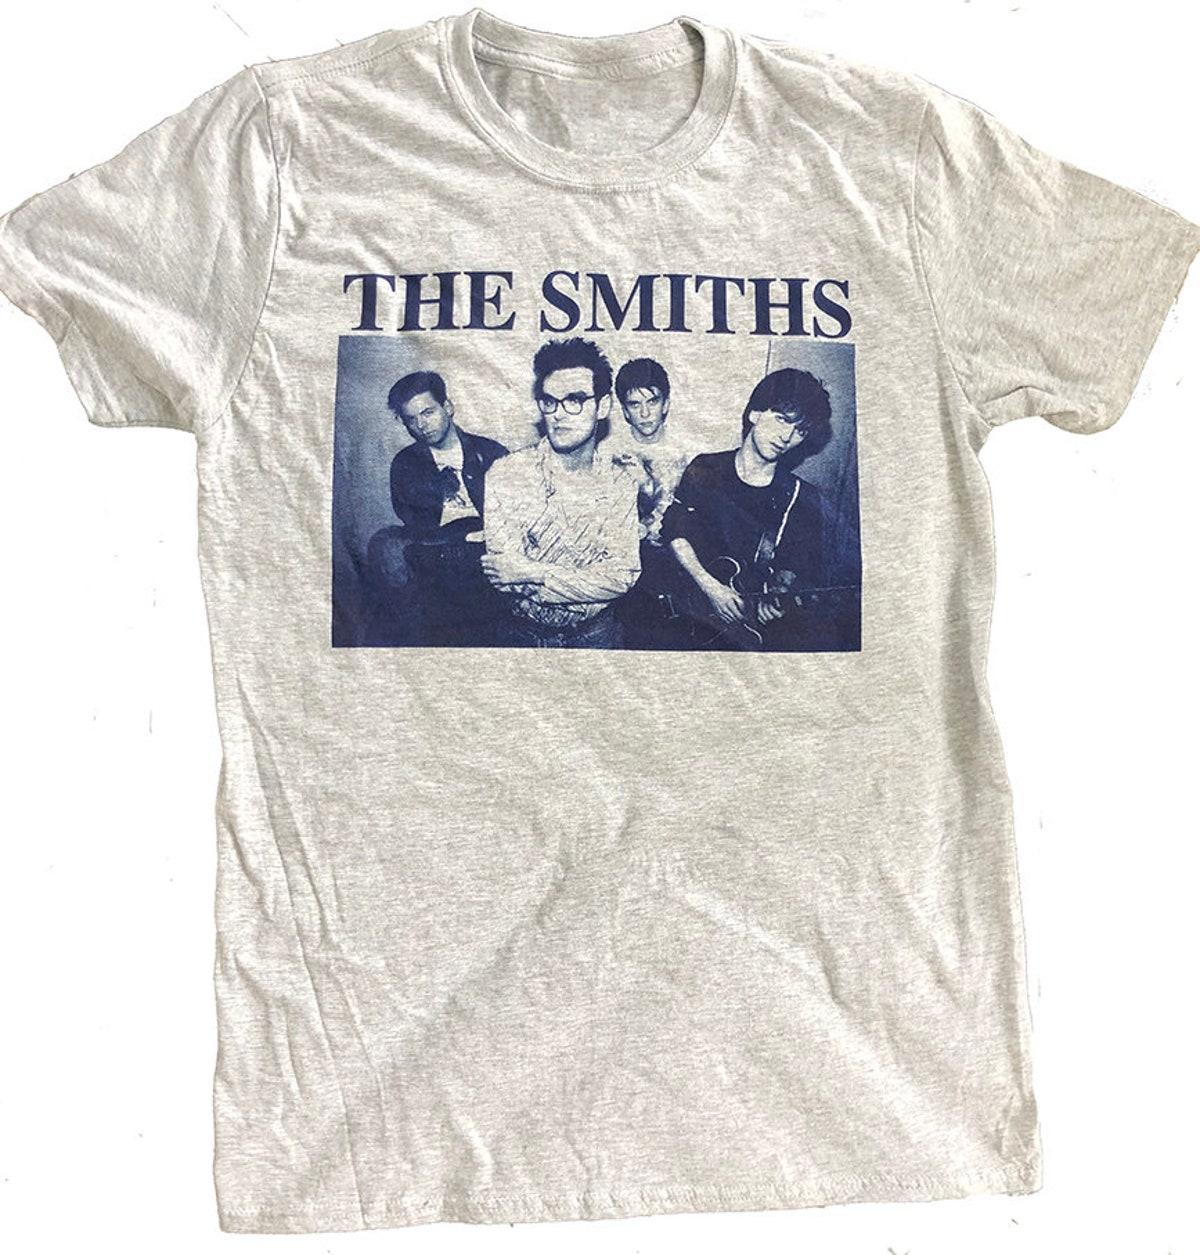 The Smiths Louder Than Bombs Album Cover Unisex T-shirt For Fans